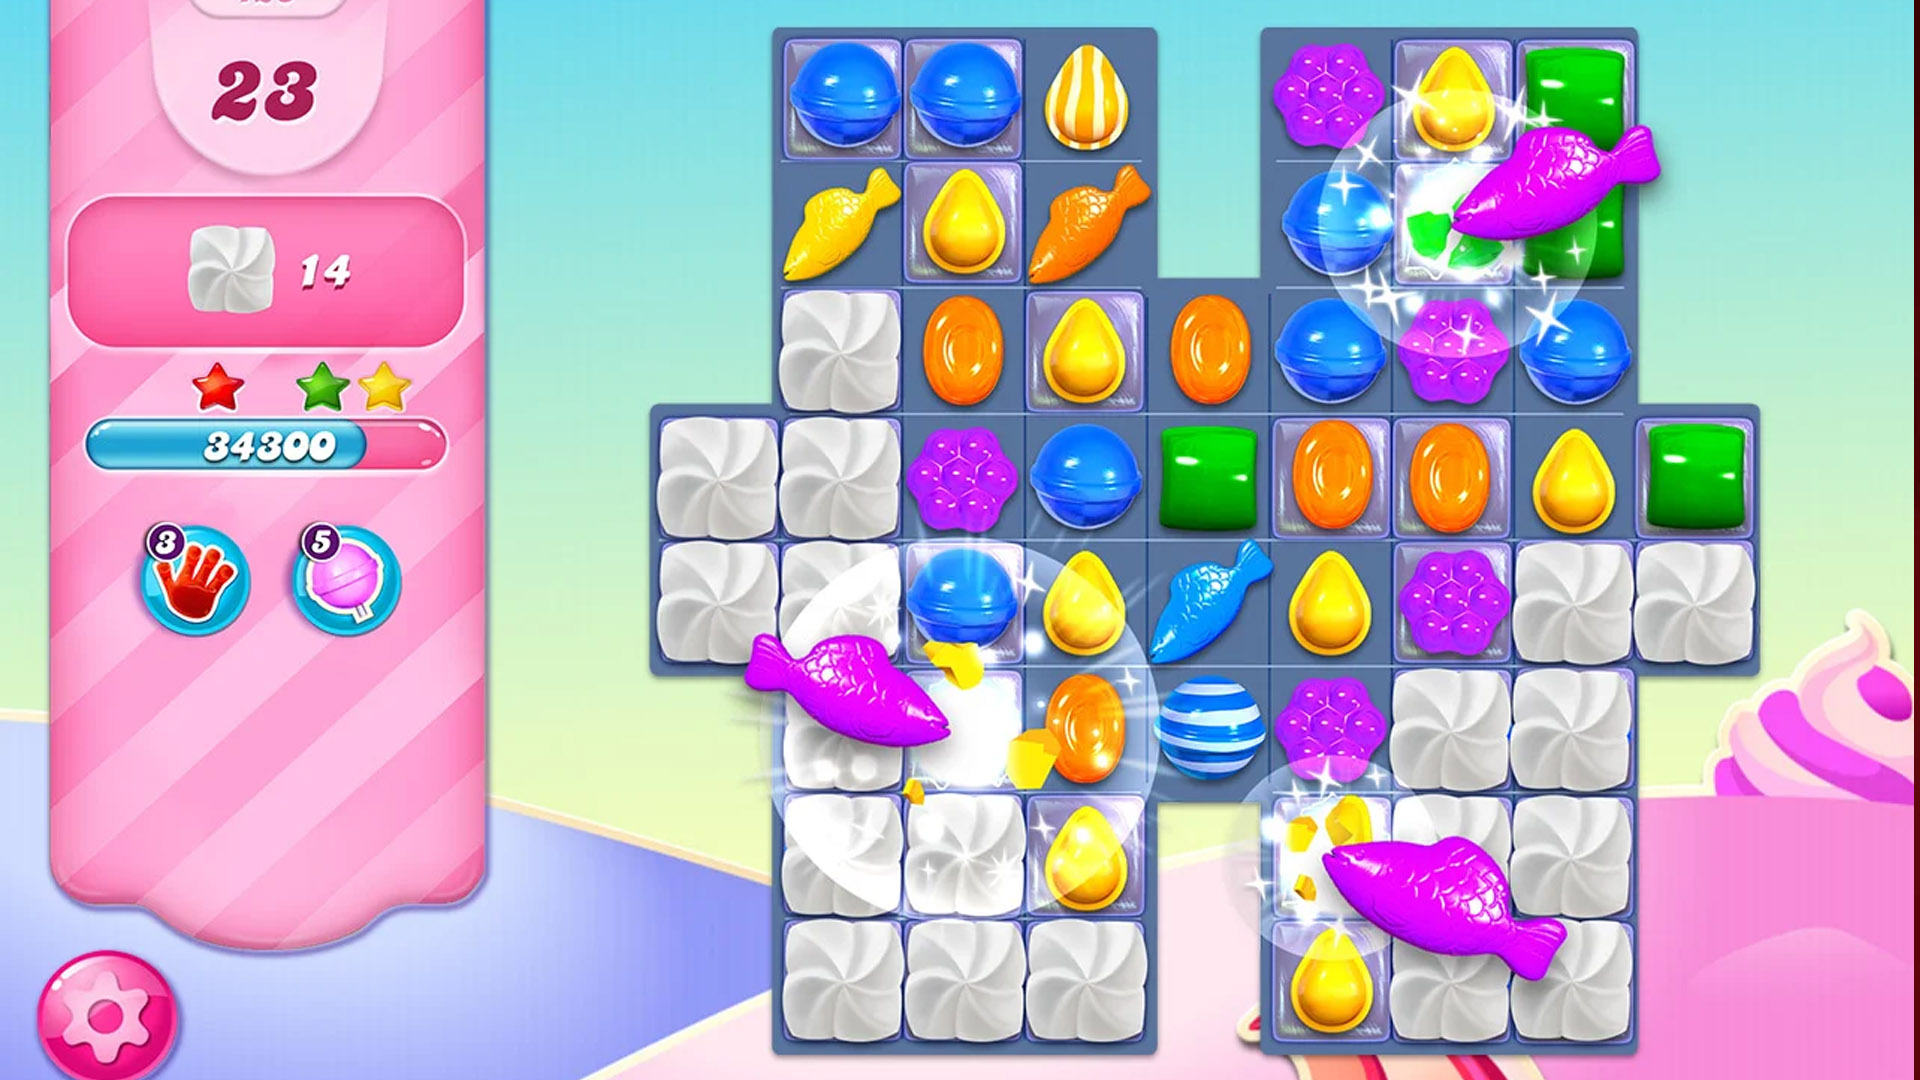 Candy Crush games – every game detailed | Pocket Tactics